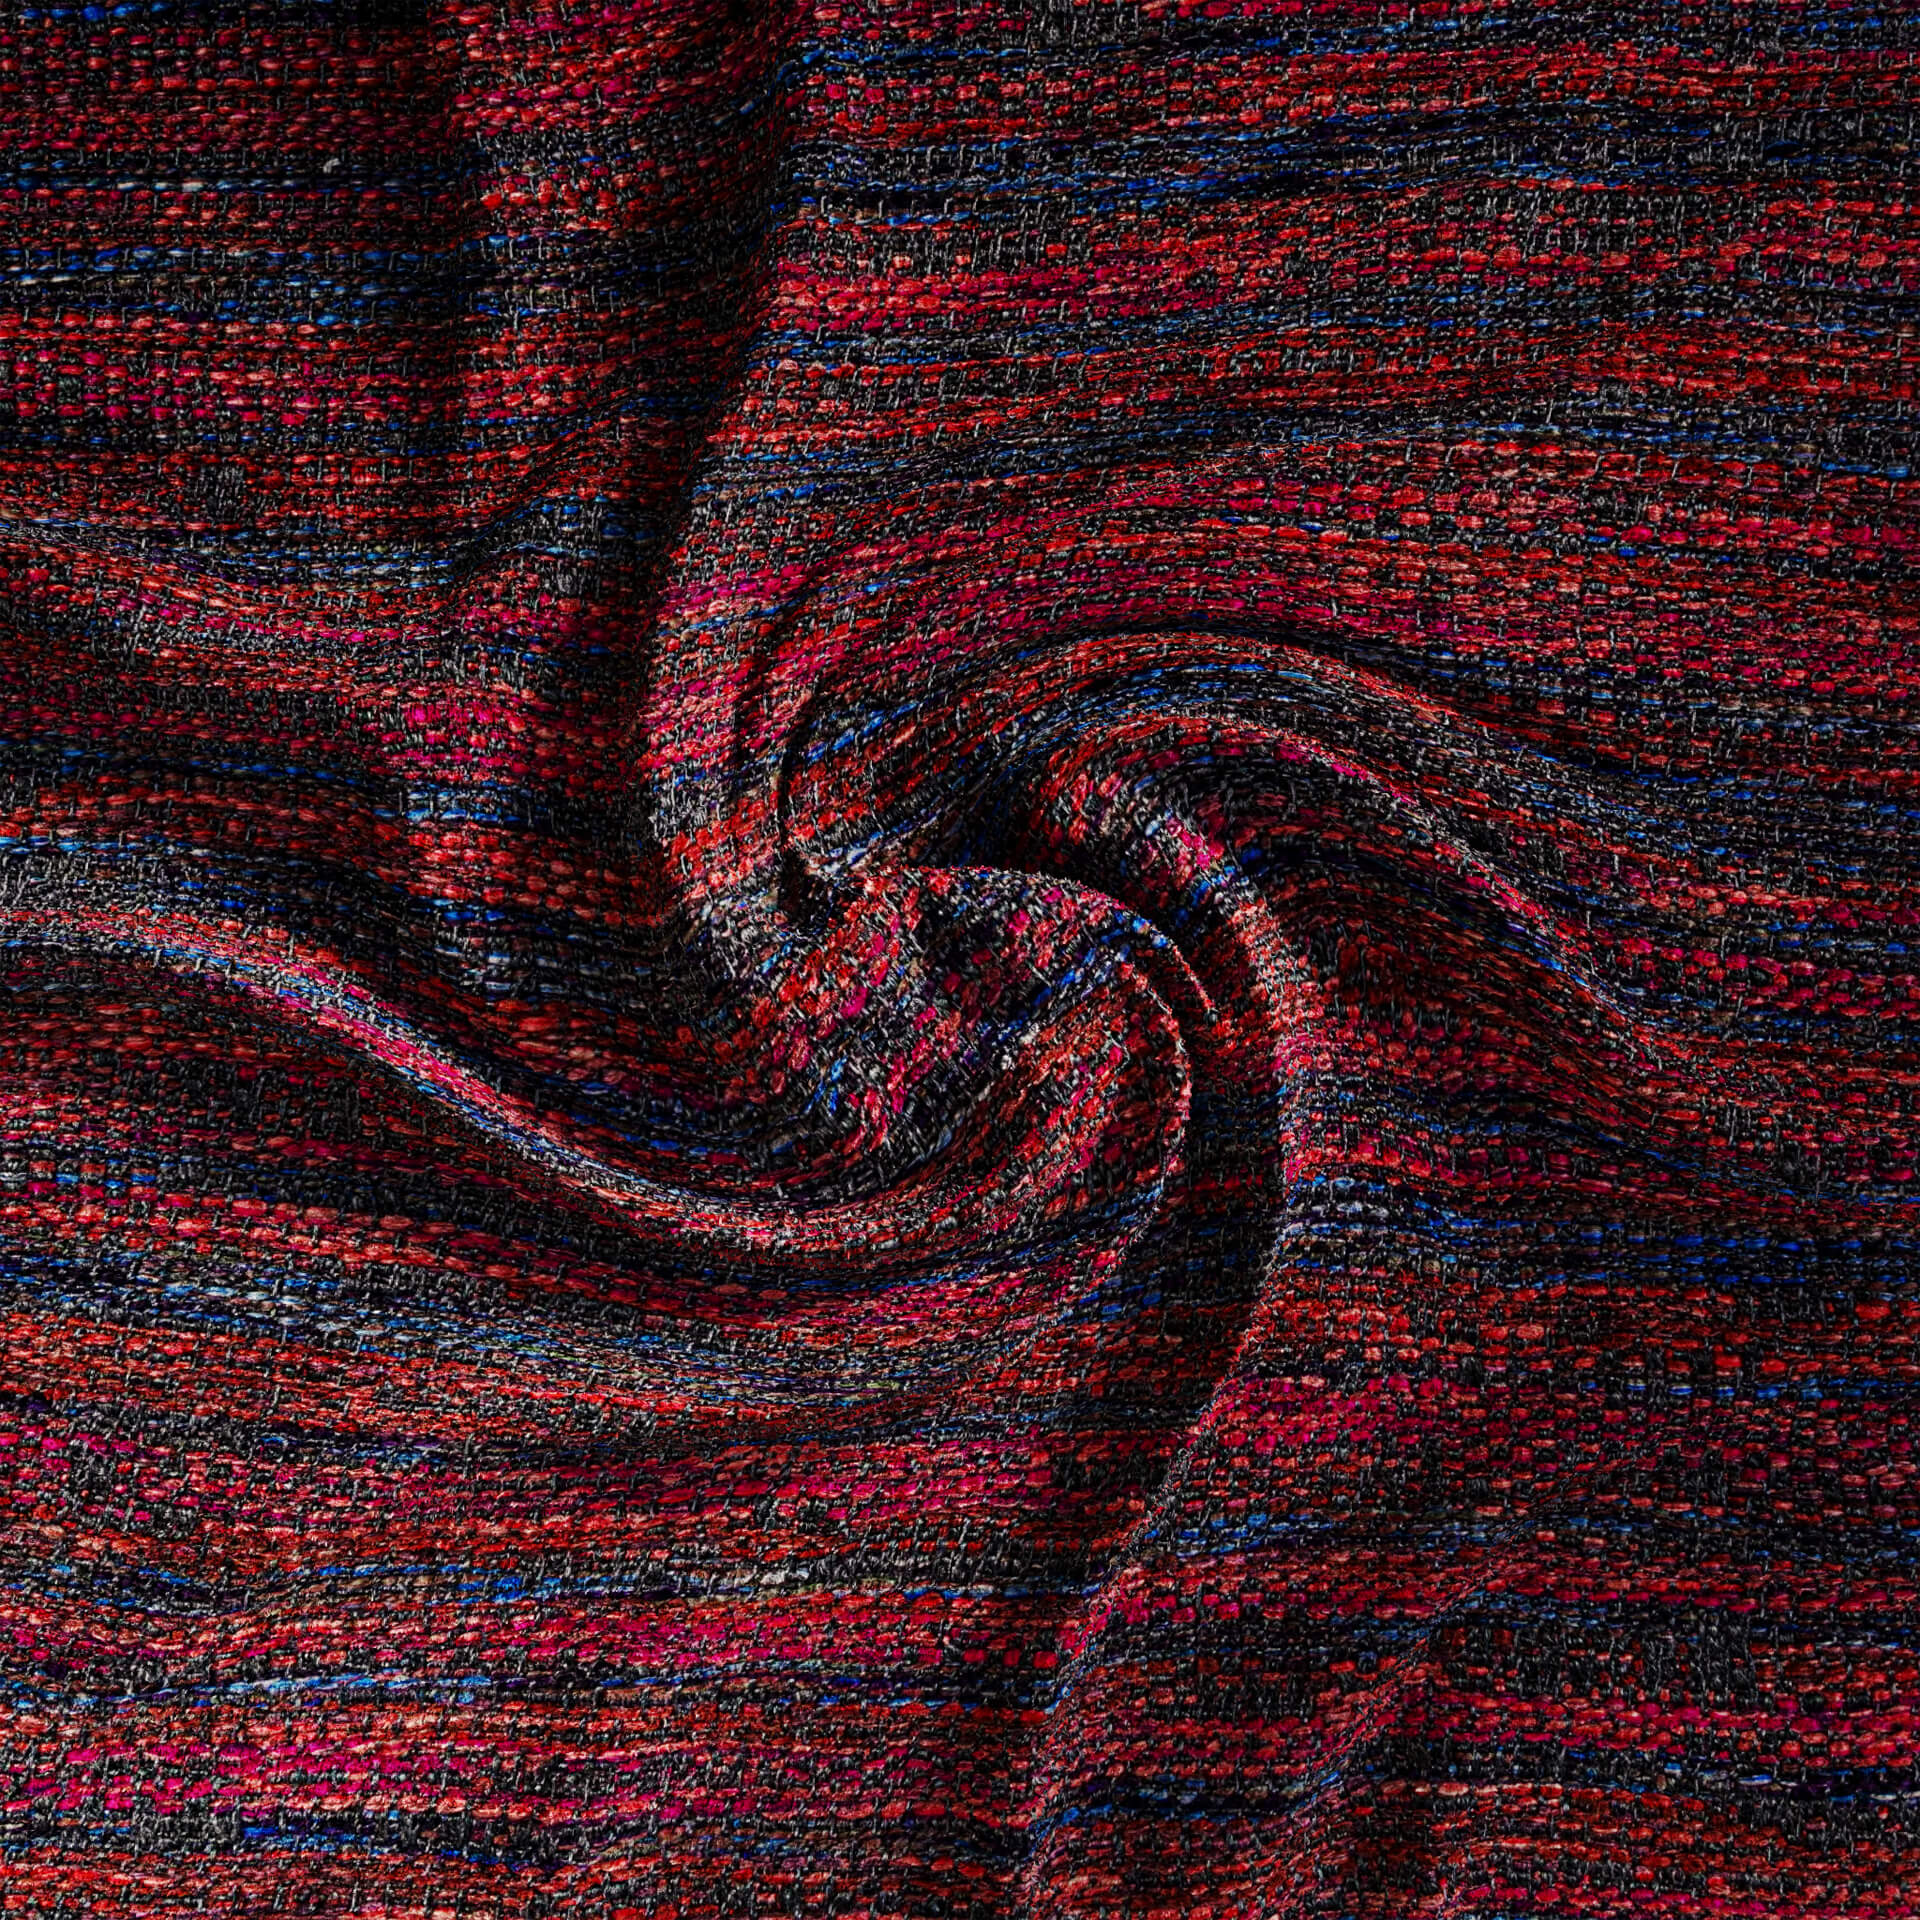 Close-Up 3D Rendering of Fabric Texture